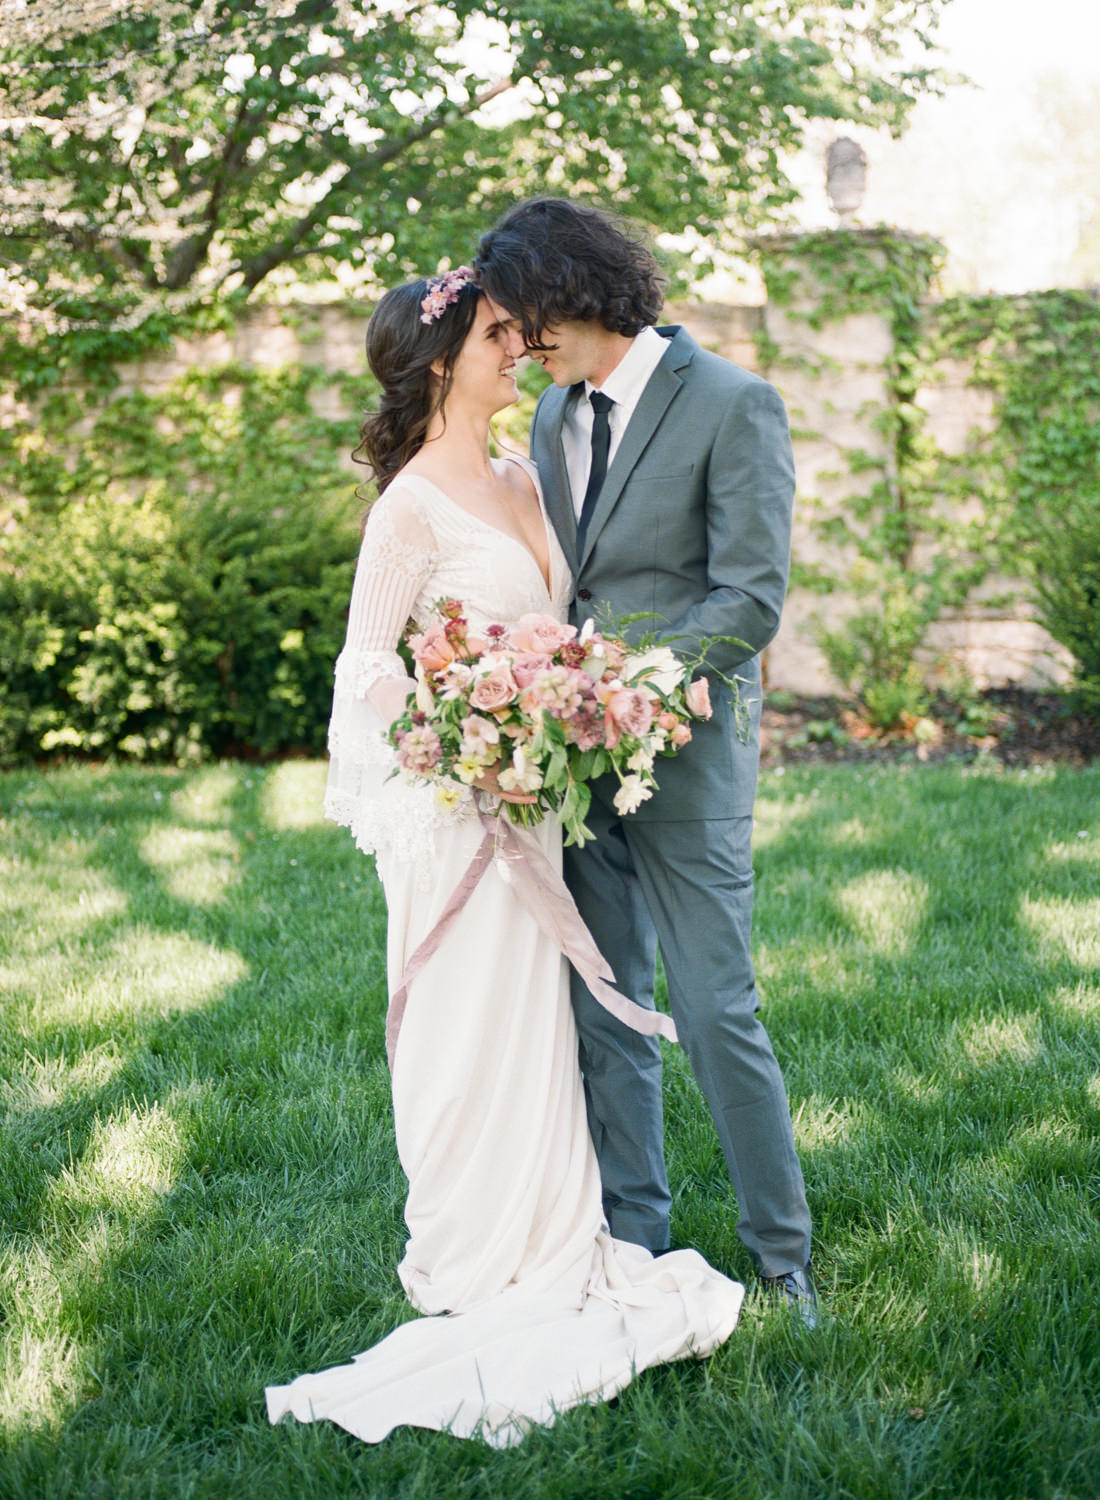 Groom and bride in Claire Pettibone dress, Erin Rhyne floral crown, mauve and pink flowers at Haseltine Estate, St. Louis Fine Art Film Wedding Photographer Erica Robnett Photography